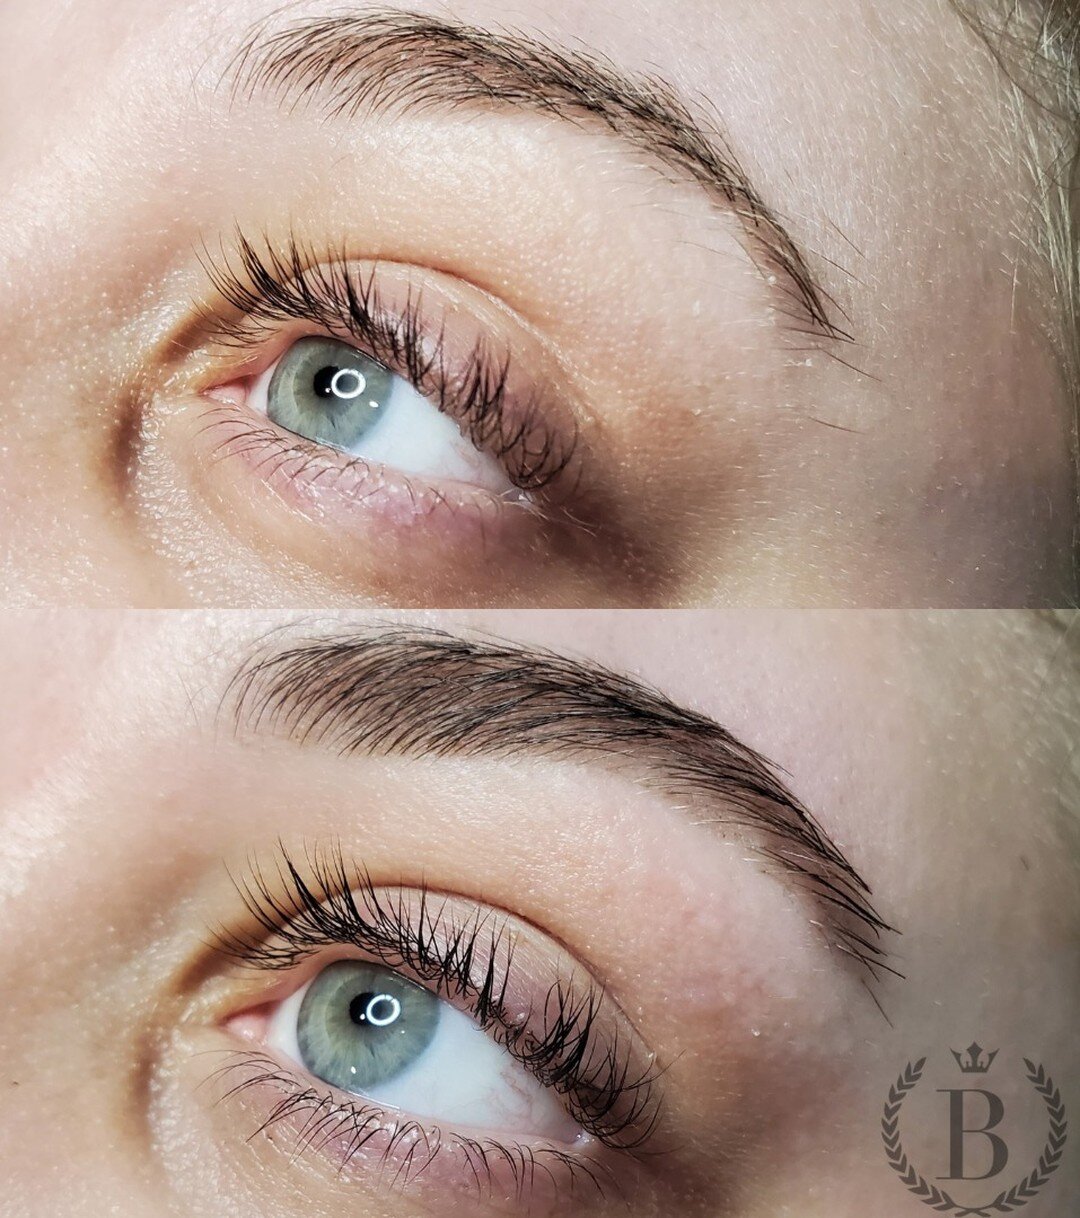 Tired of pale lashes and lifeless brows? 

✨Try an Eyelash Tint + Brow Design and Tint today!✨

☀️With the sun finally out for spring, you might notice your brows starting to look different - the sunlight can fade the color in your brows and lashes m